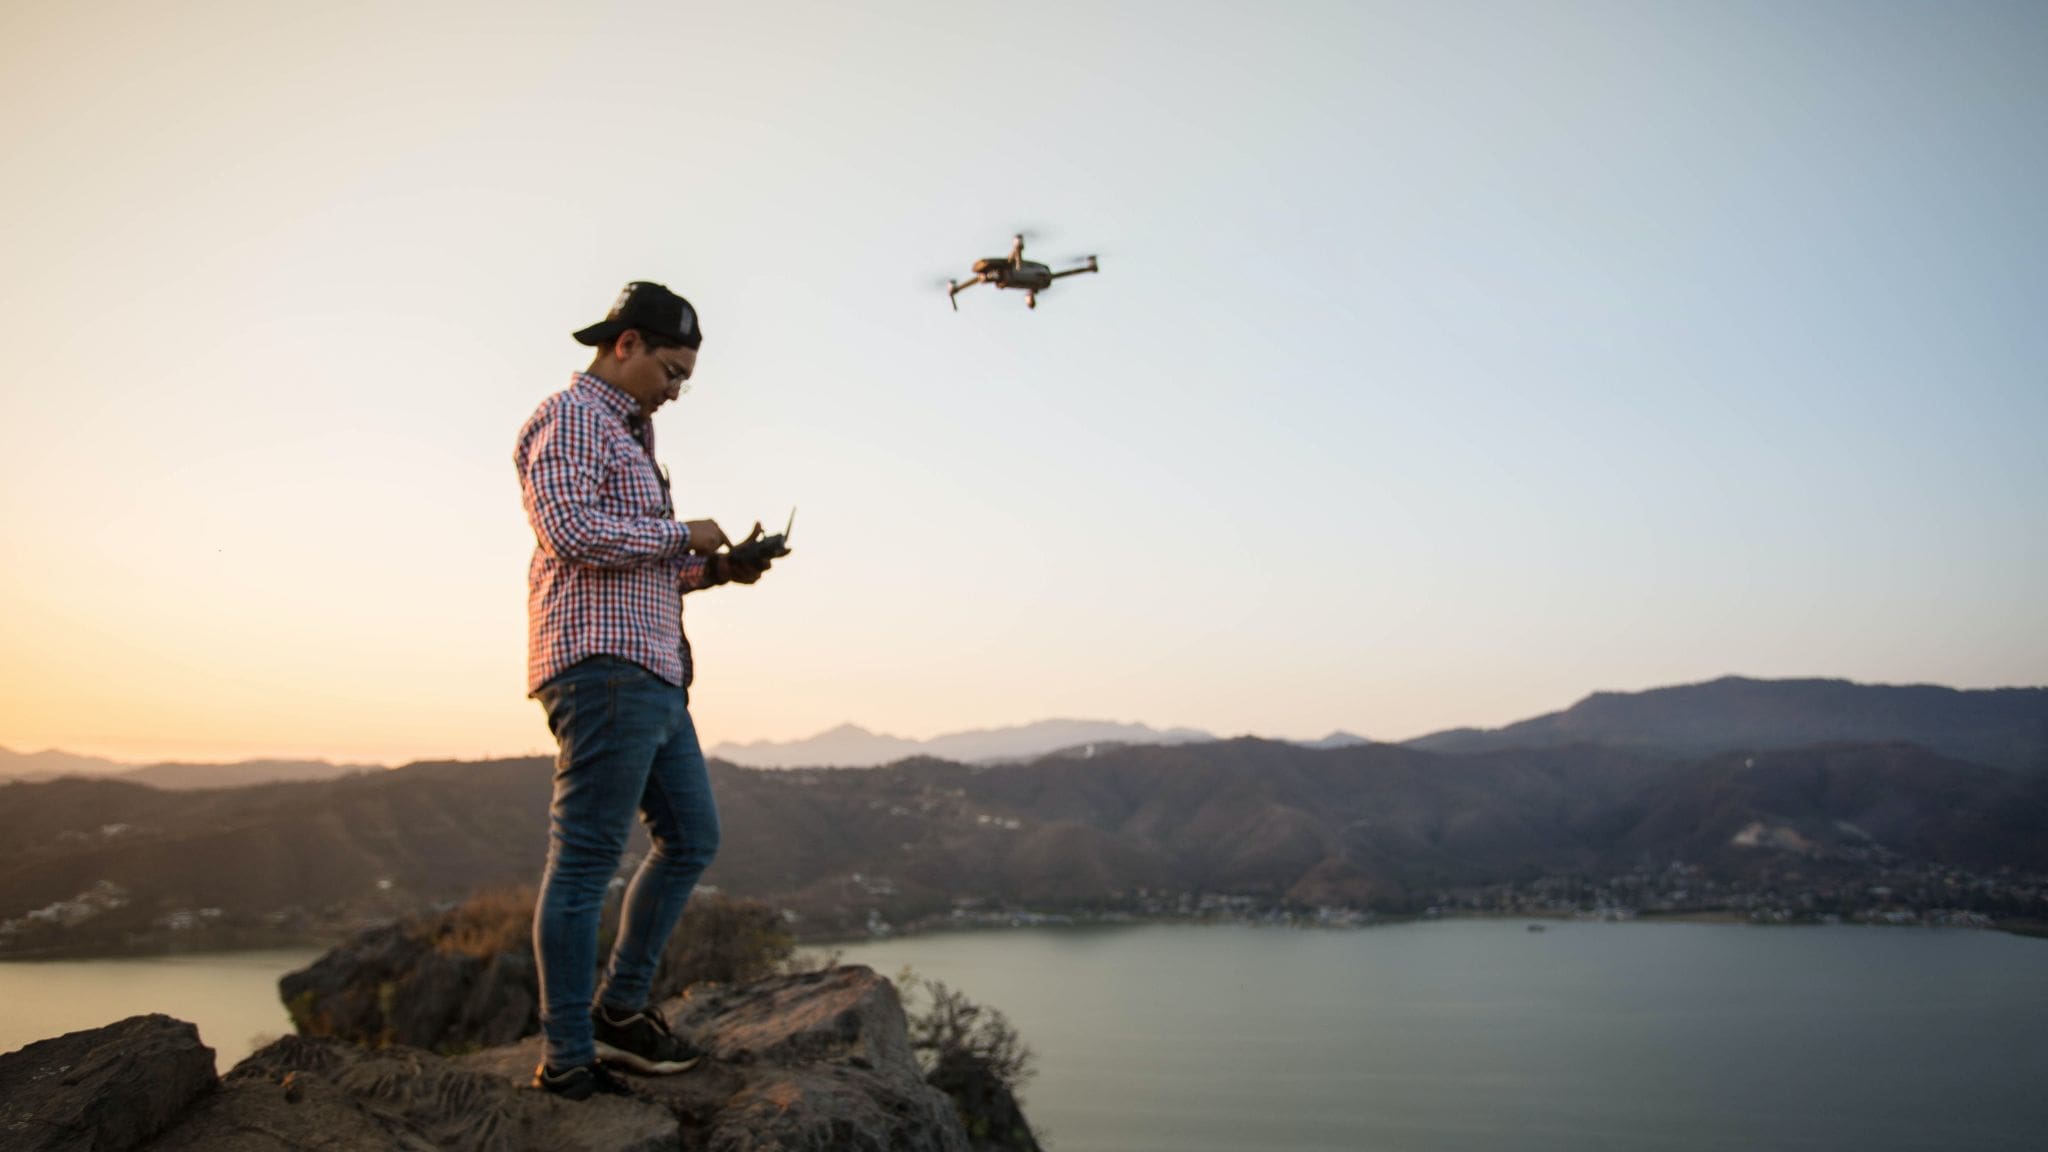 Man flying a drone near a body of water